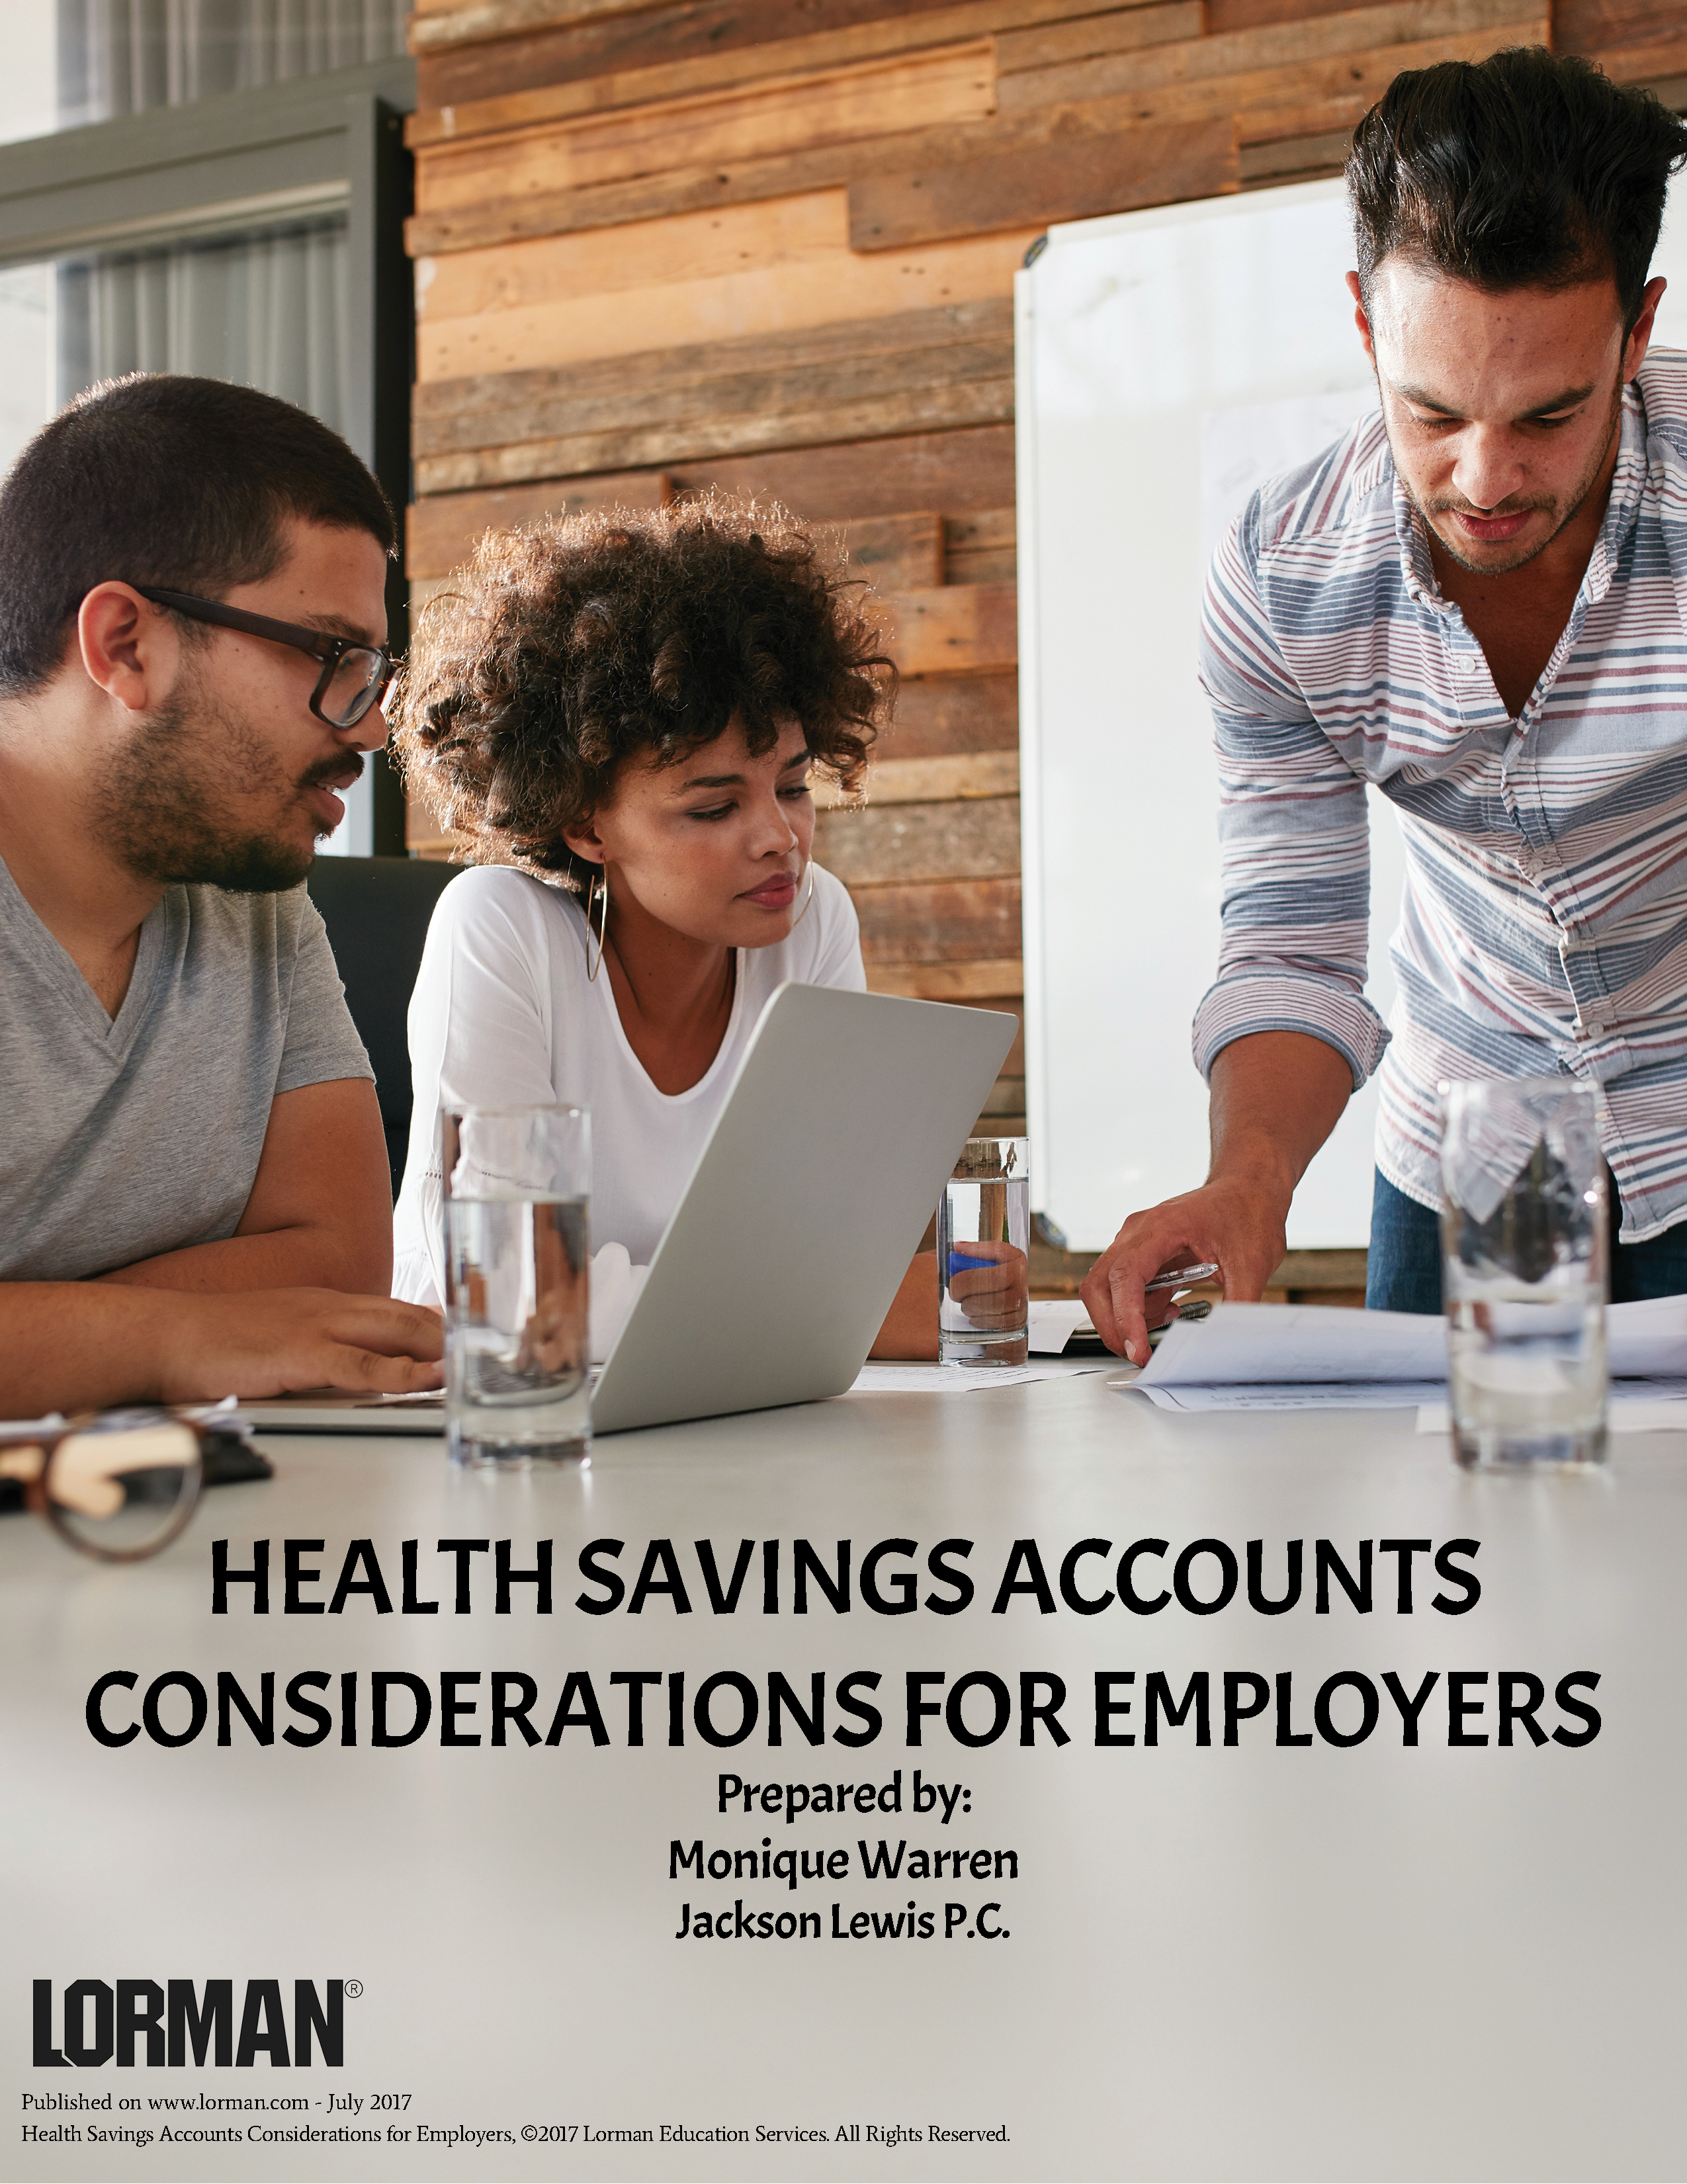 Health Savings Accounts Considerations for Employers